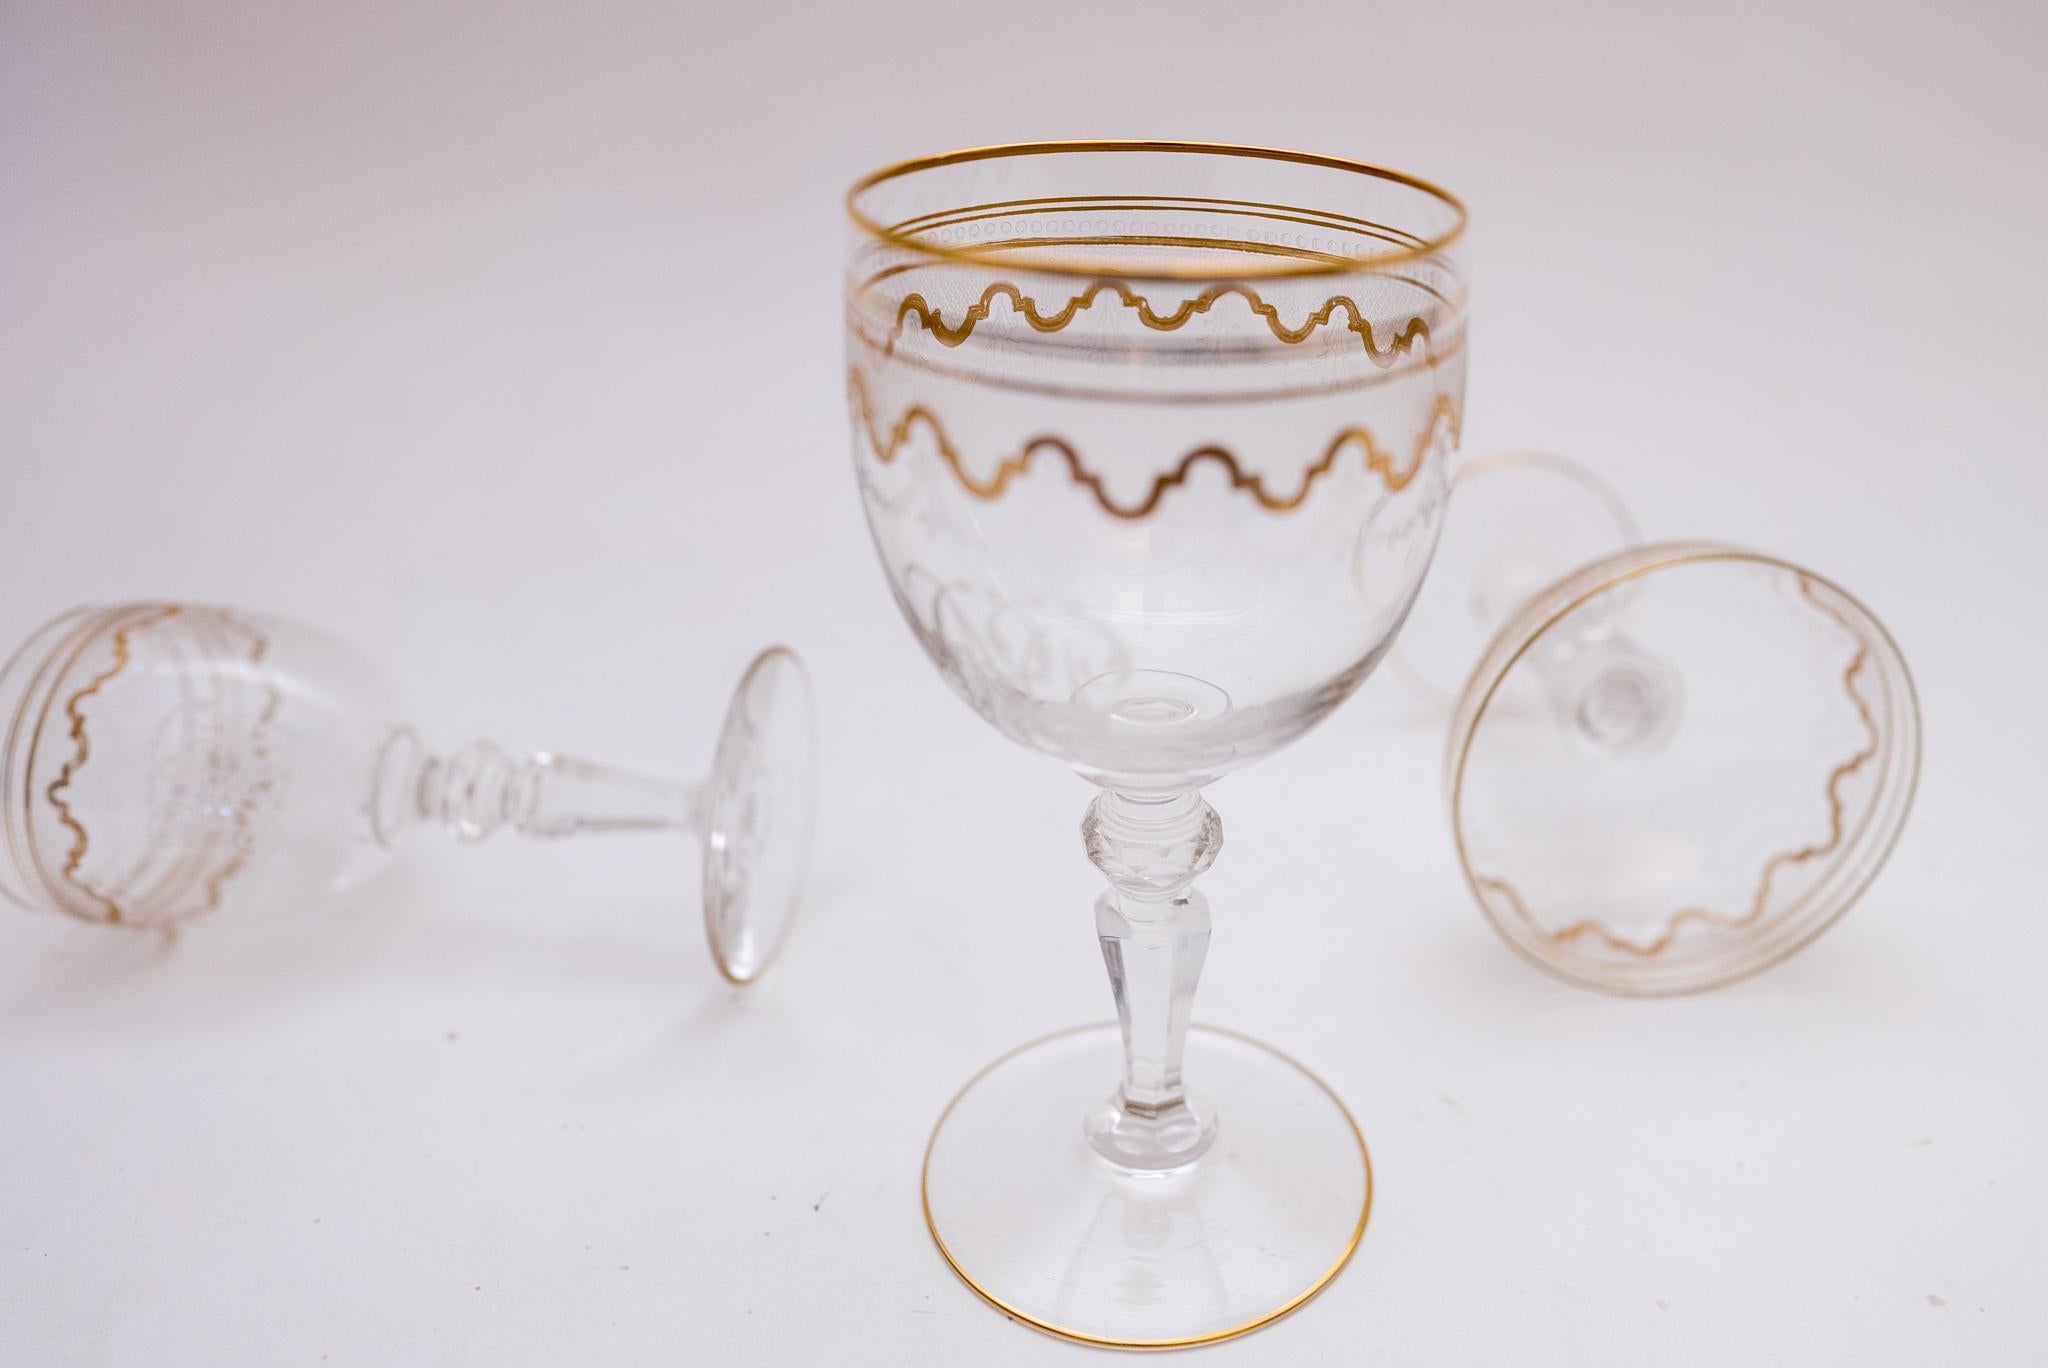 A great collection from one of the world's re known crystal companies:
 Saint Louis, France. This collection of 33 pieces includes 
11 Water goblets six and one half inches high.
 12 Wine glasses that are 5 and one quarter inches high.
 10